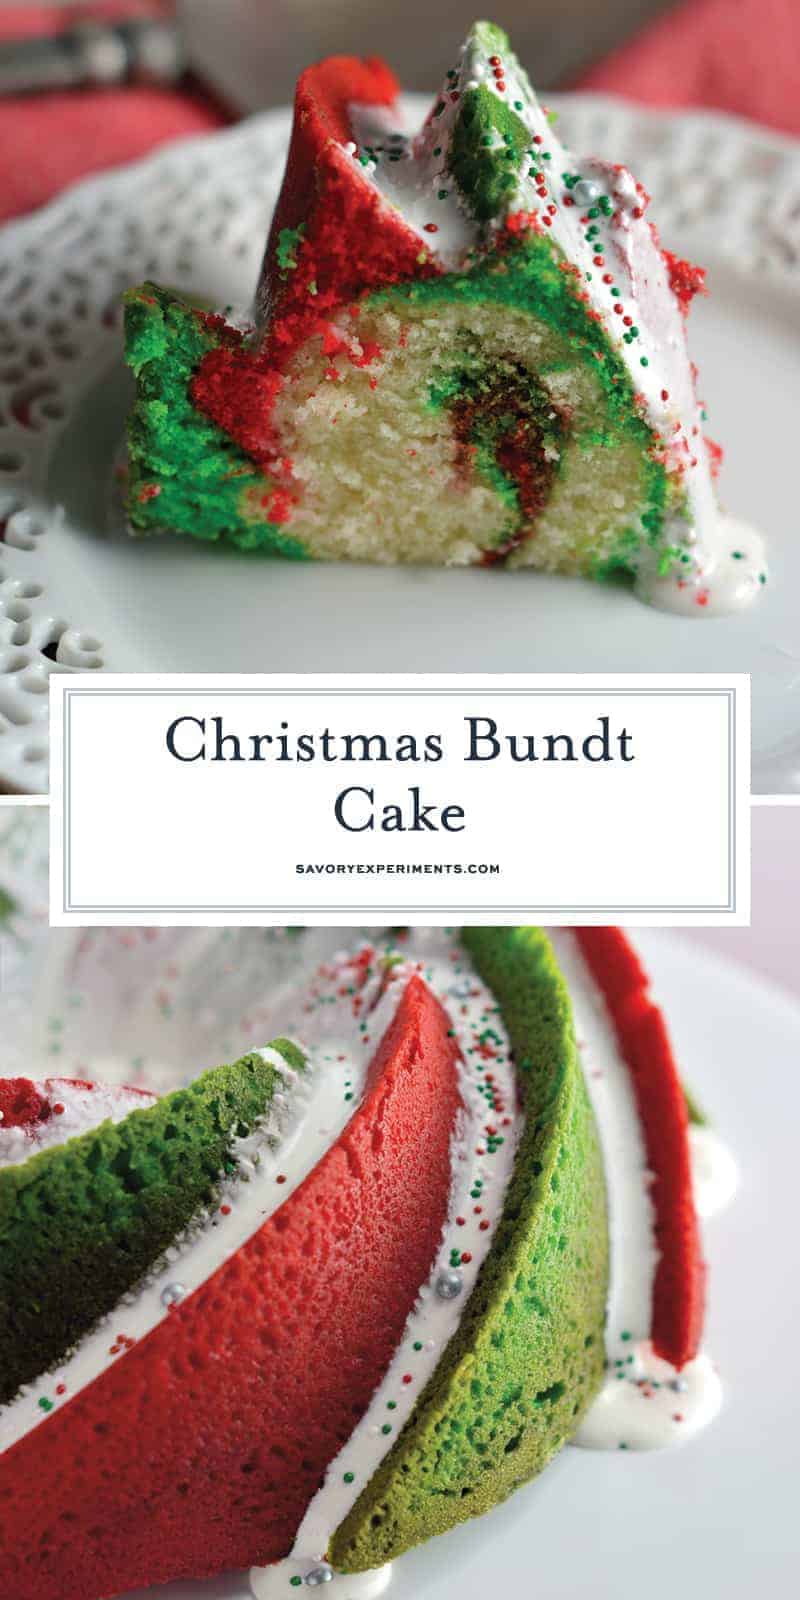 Christmas Bundt Cake | A Festive Red and Green Holiday Cake!